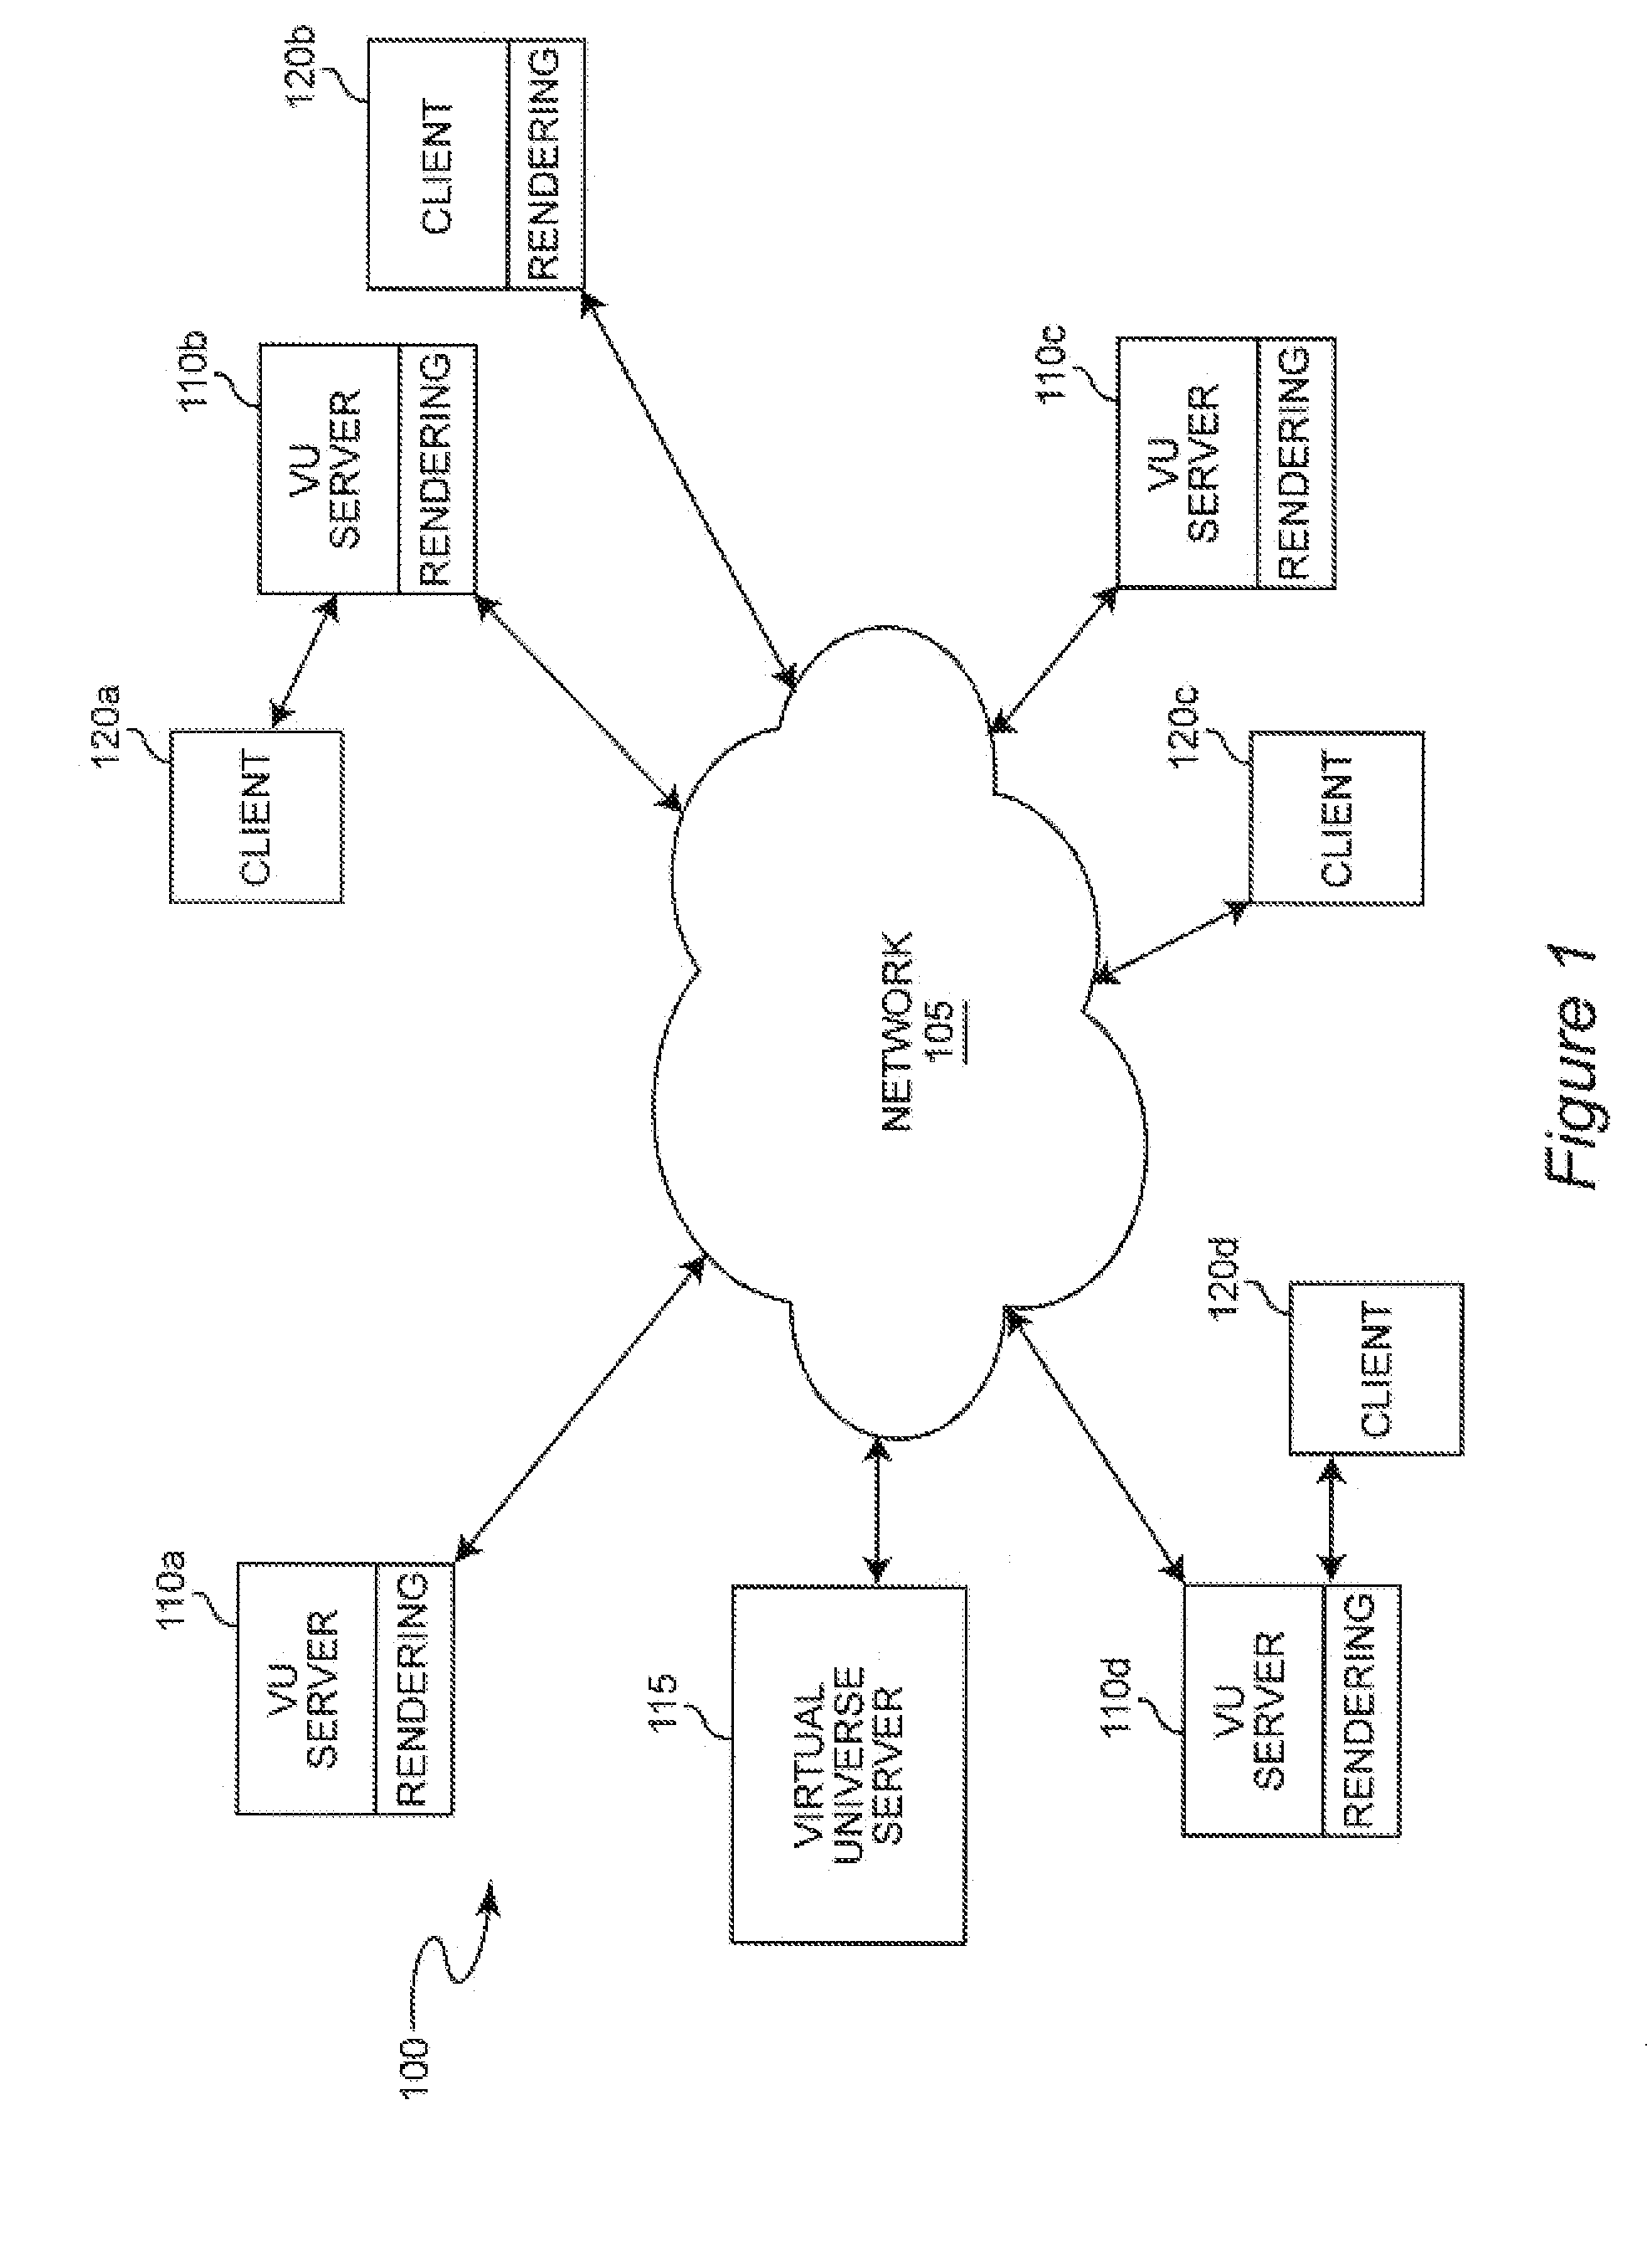 Method and System for Filtering Movements Between Virtual Environments